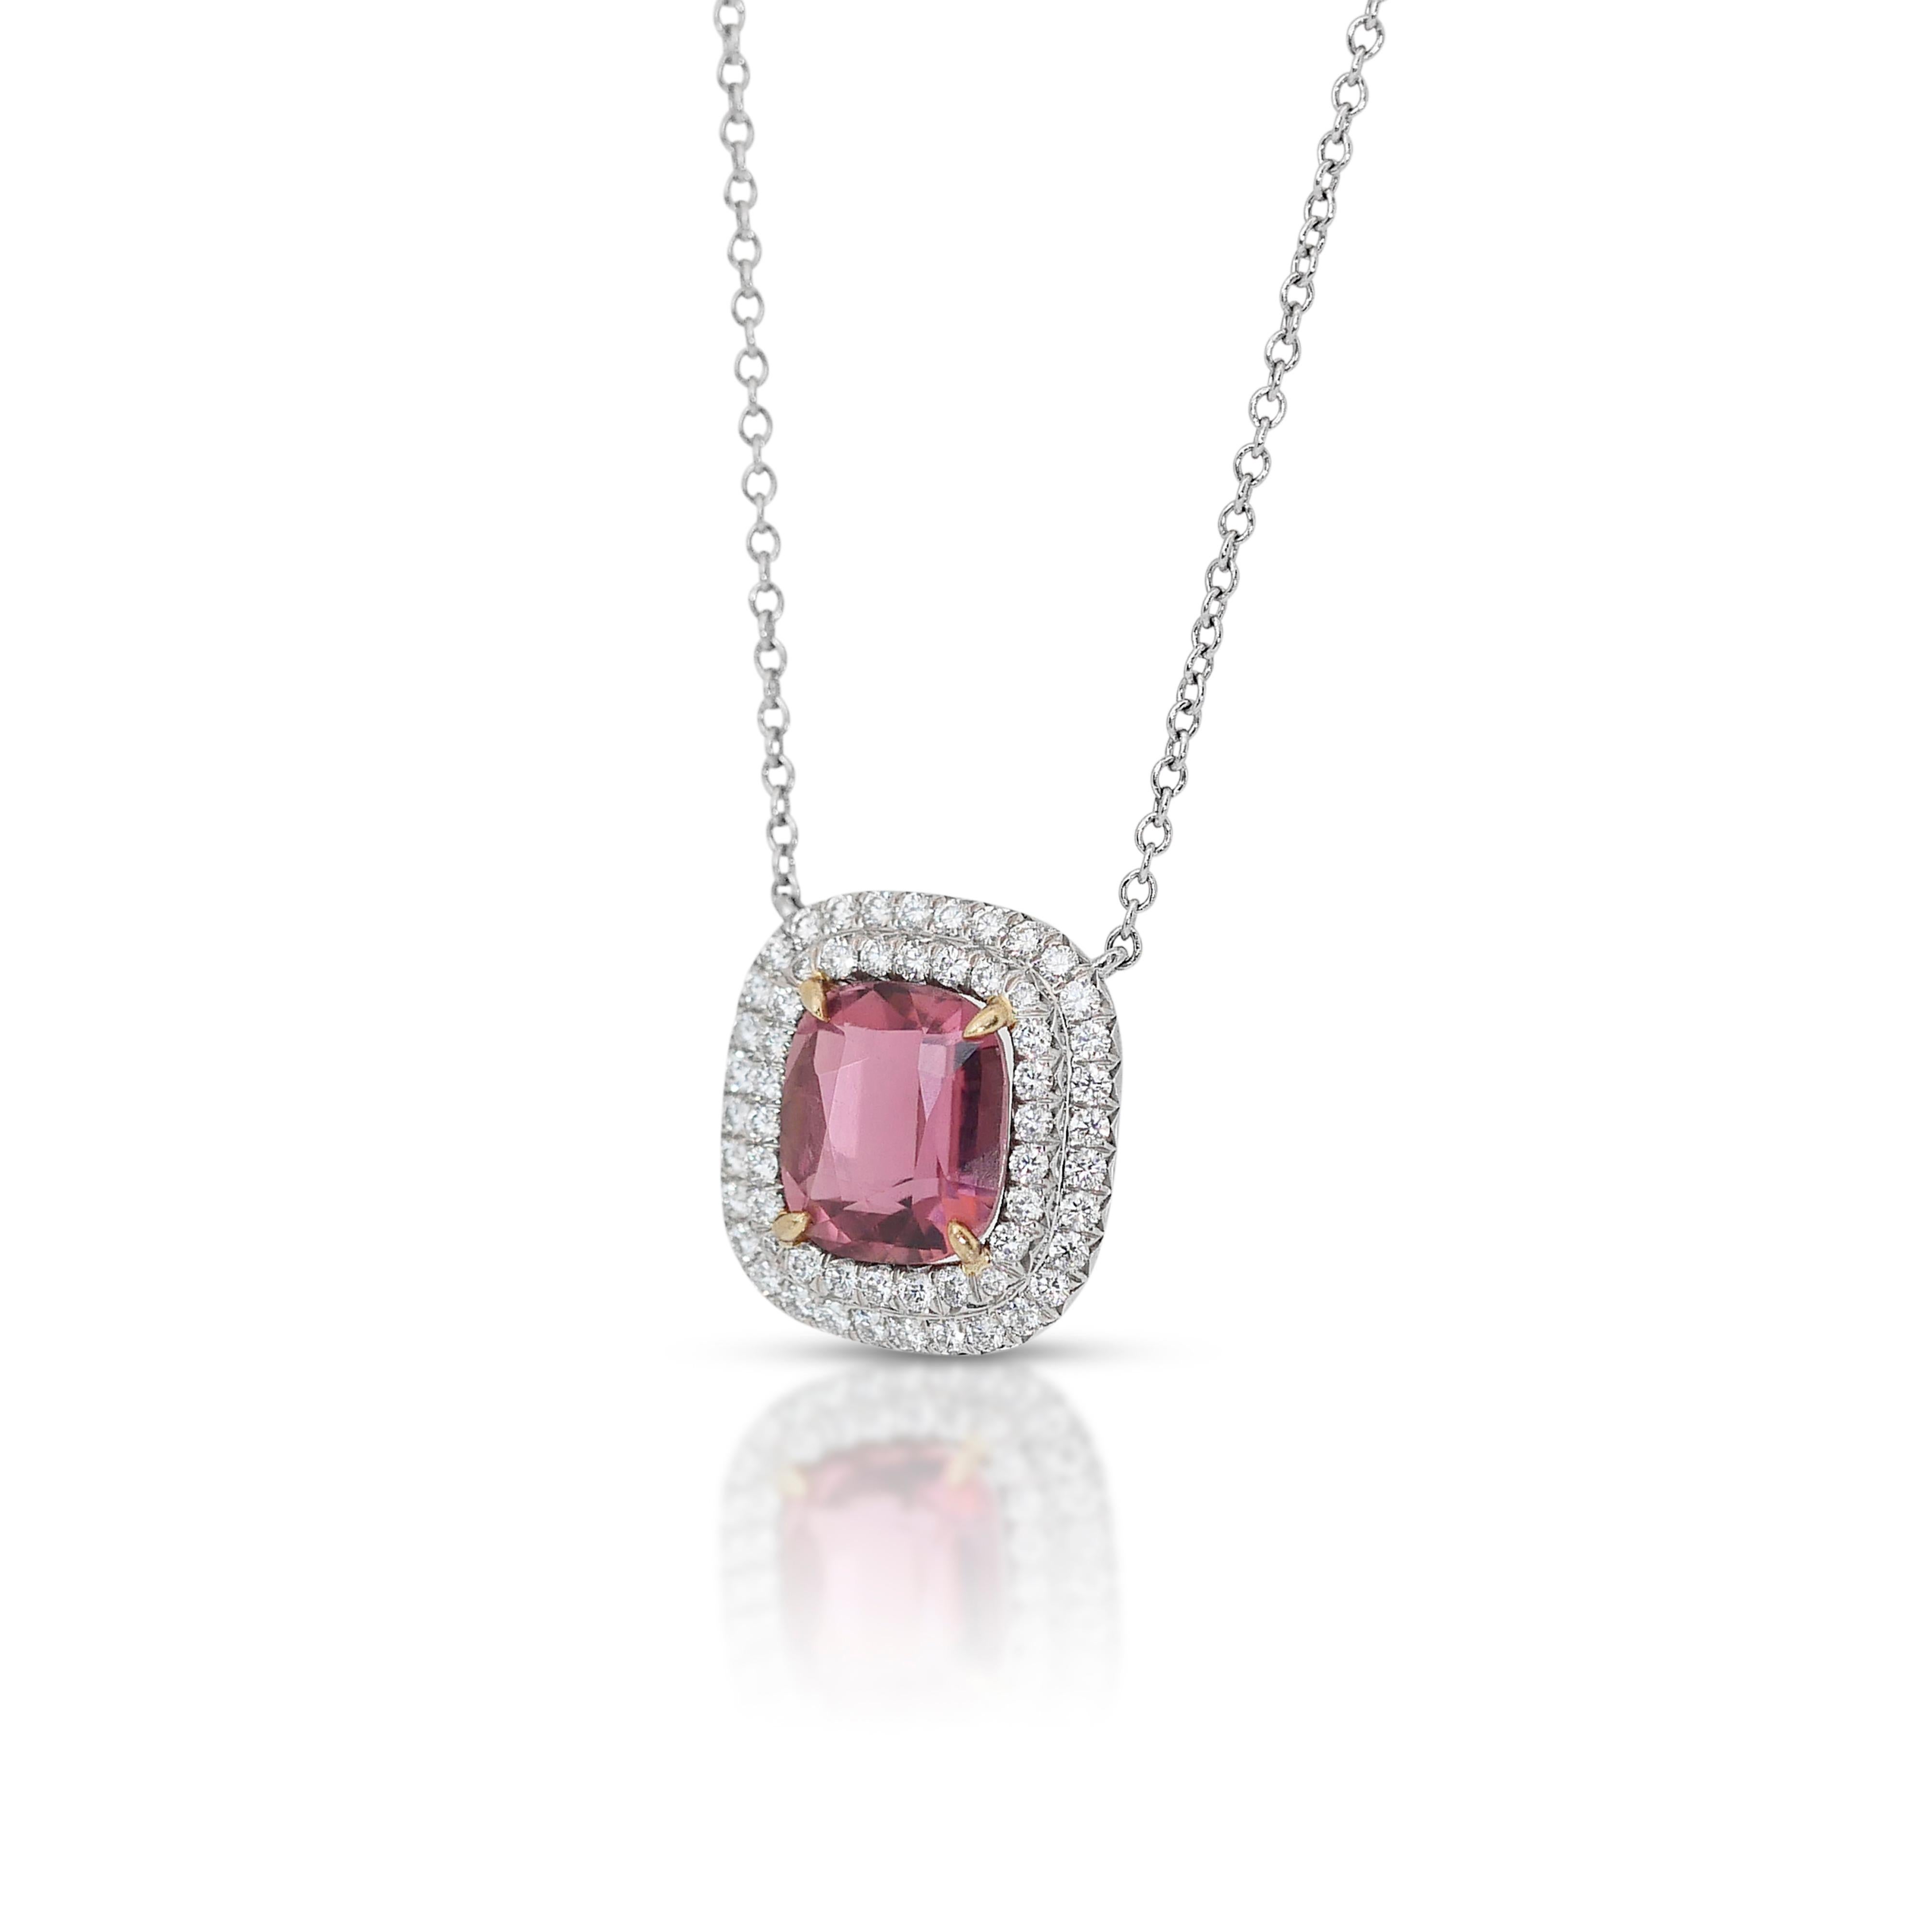 Alluring 2.70ct Tourmaline and Diamonds Halo Necklace in 18k White & Yellow Gold For Sale 2